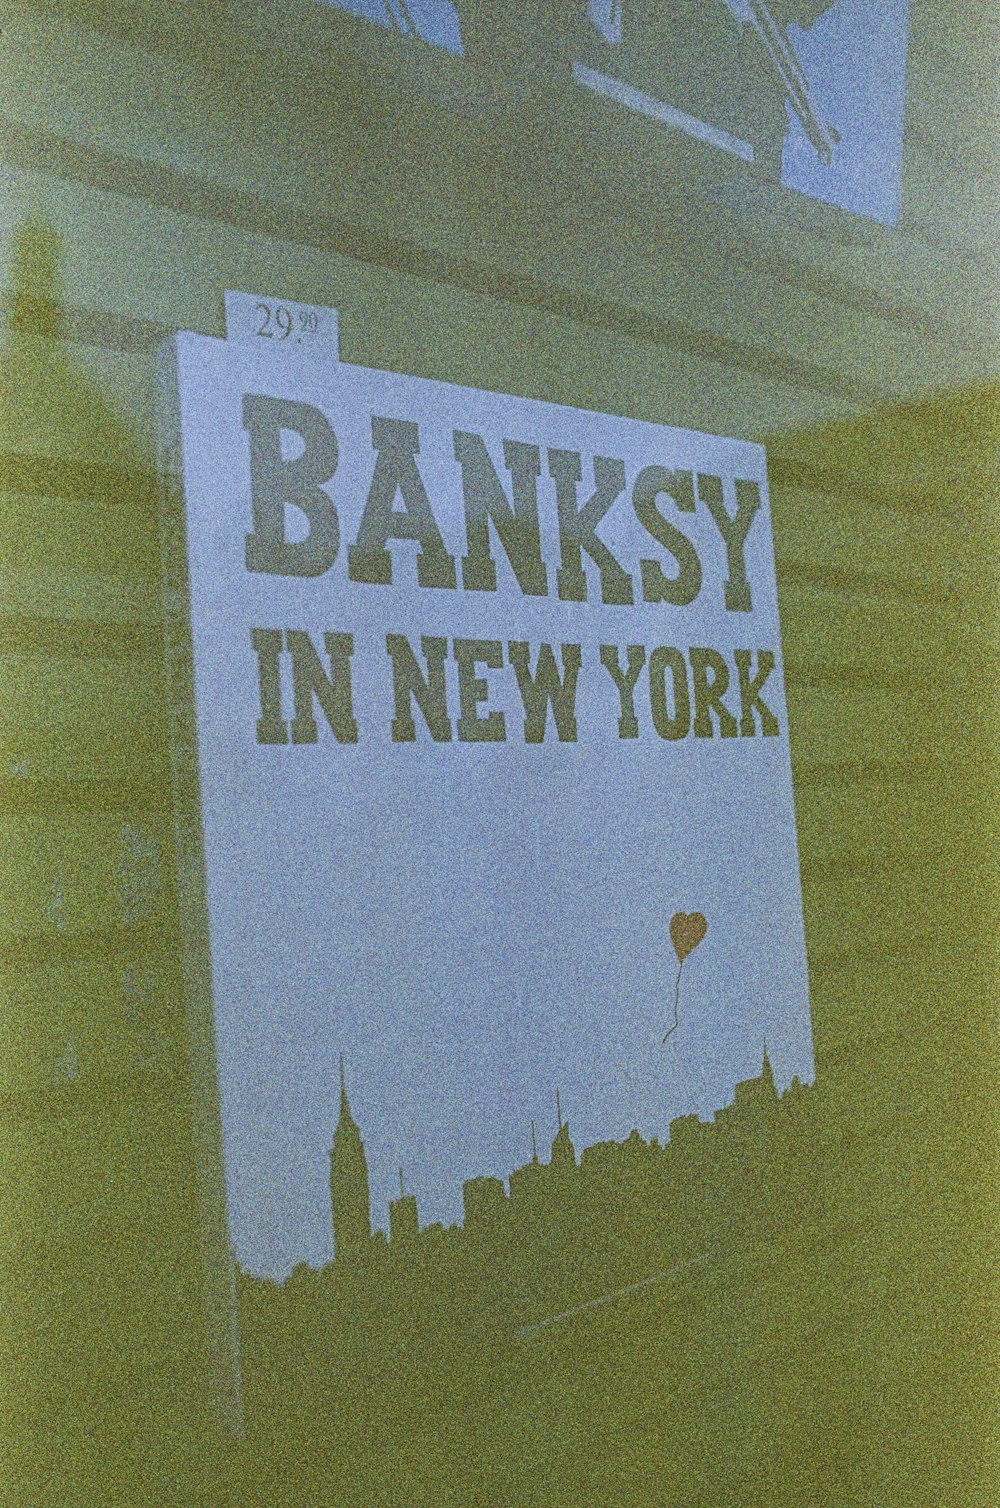 a sign on the side of a building that says banksy in new york